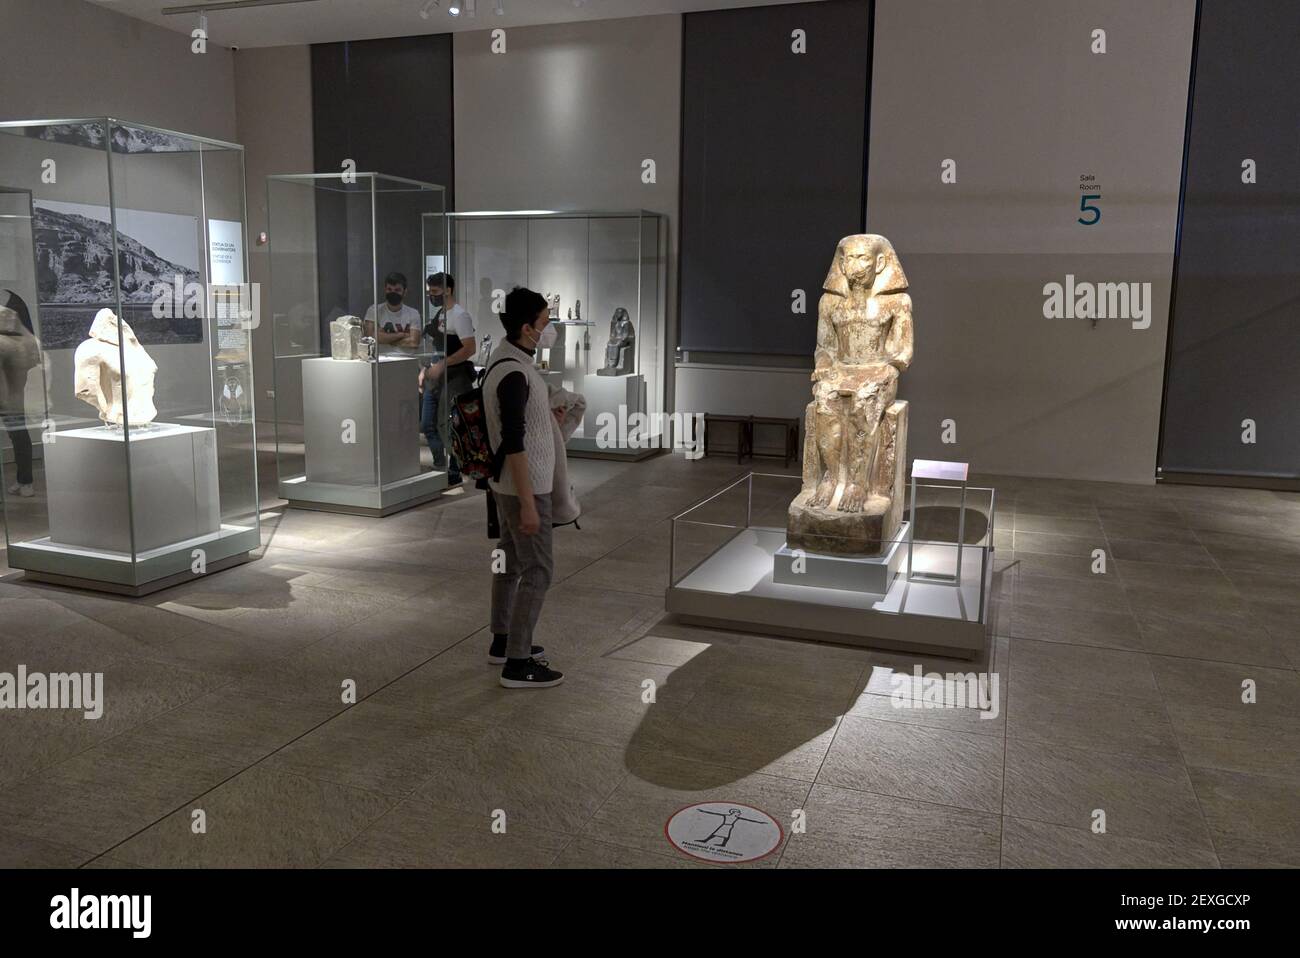 Egyptian museum in Turin, Italy - February 2021: tourists observe the classic stone statues of the imperial era Stock Photo